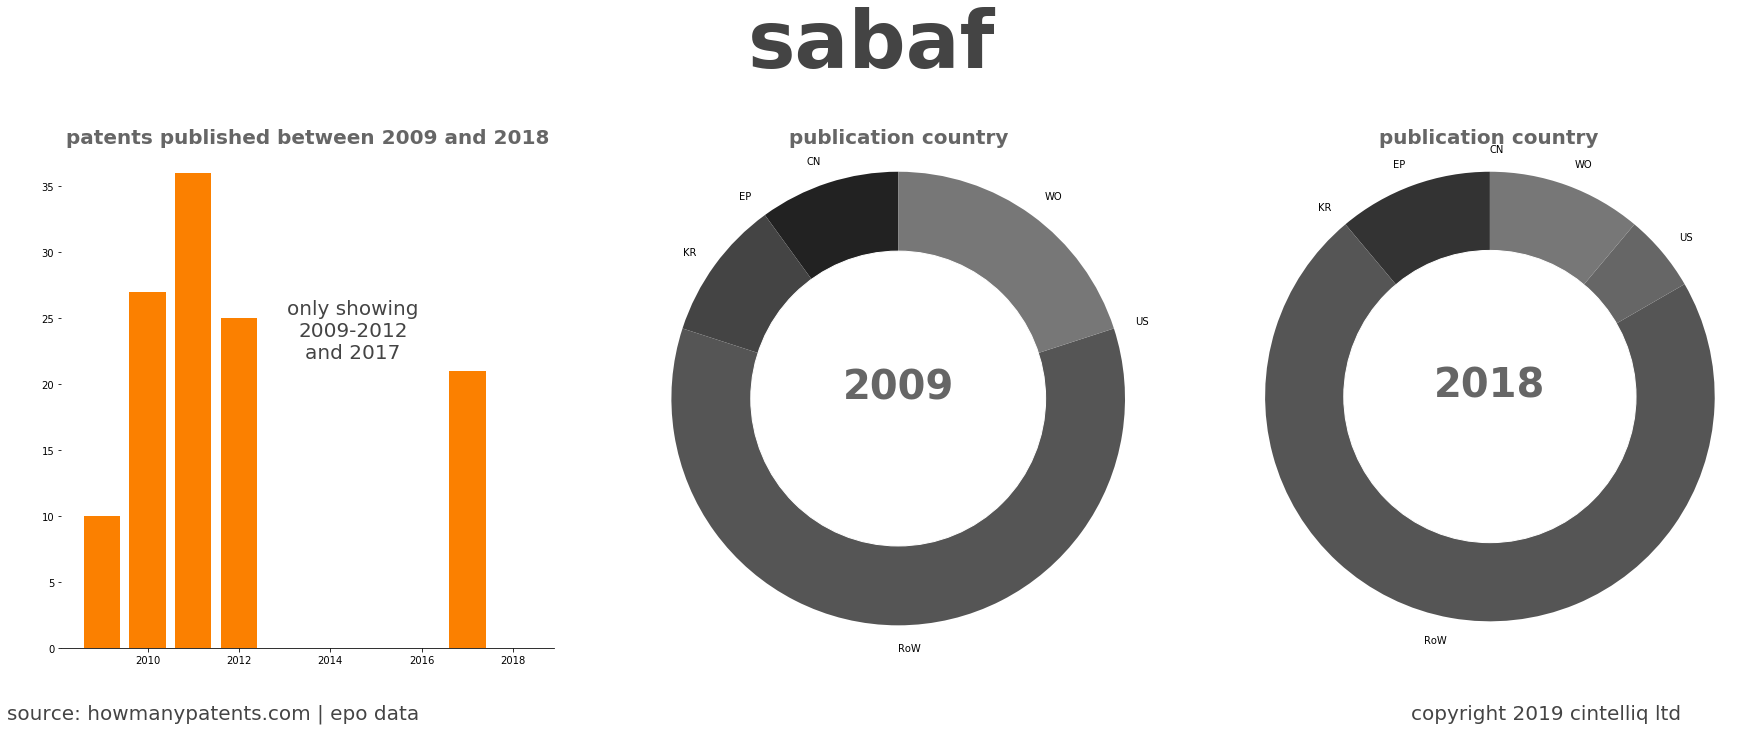 summary of patents for Sabaf